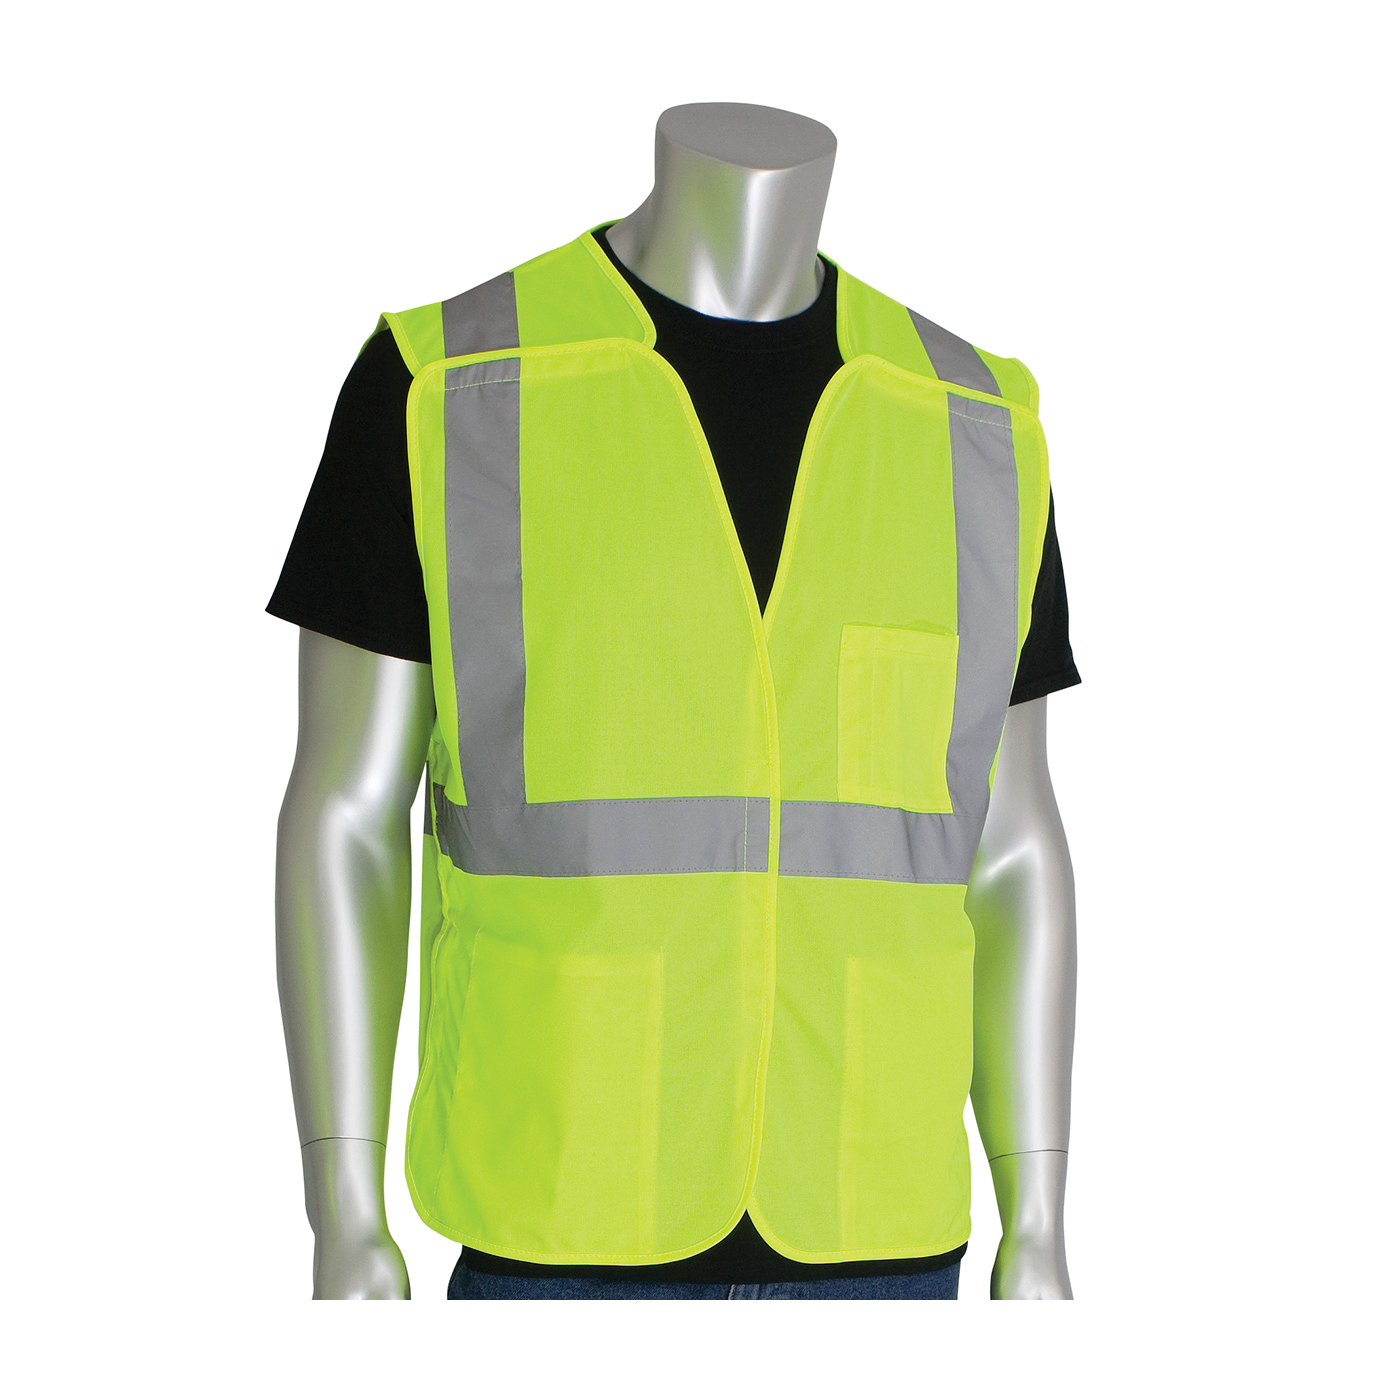 PIP® 302-5PVLY-2X Safety Vest, 2XL, Hi-Viz Lime Yellow, Polyester, Hook and Loop Closure, 3 Pockets, ANSI Class: Class 2, Specifications Met: ANSI 107 Type R